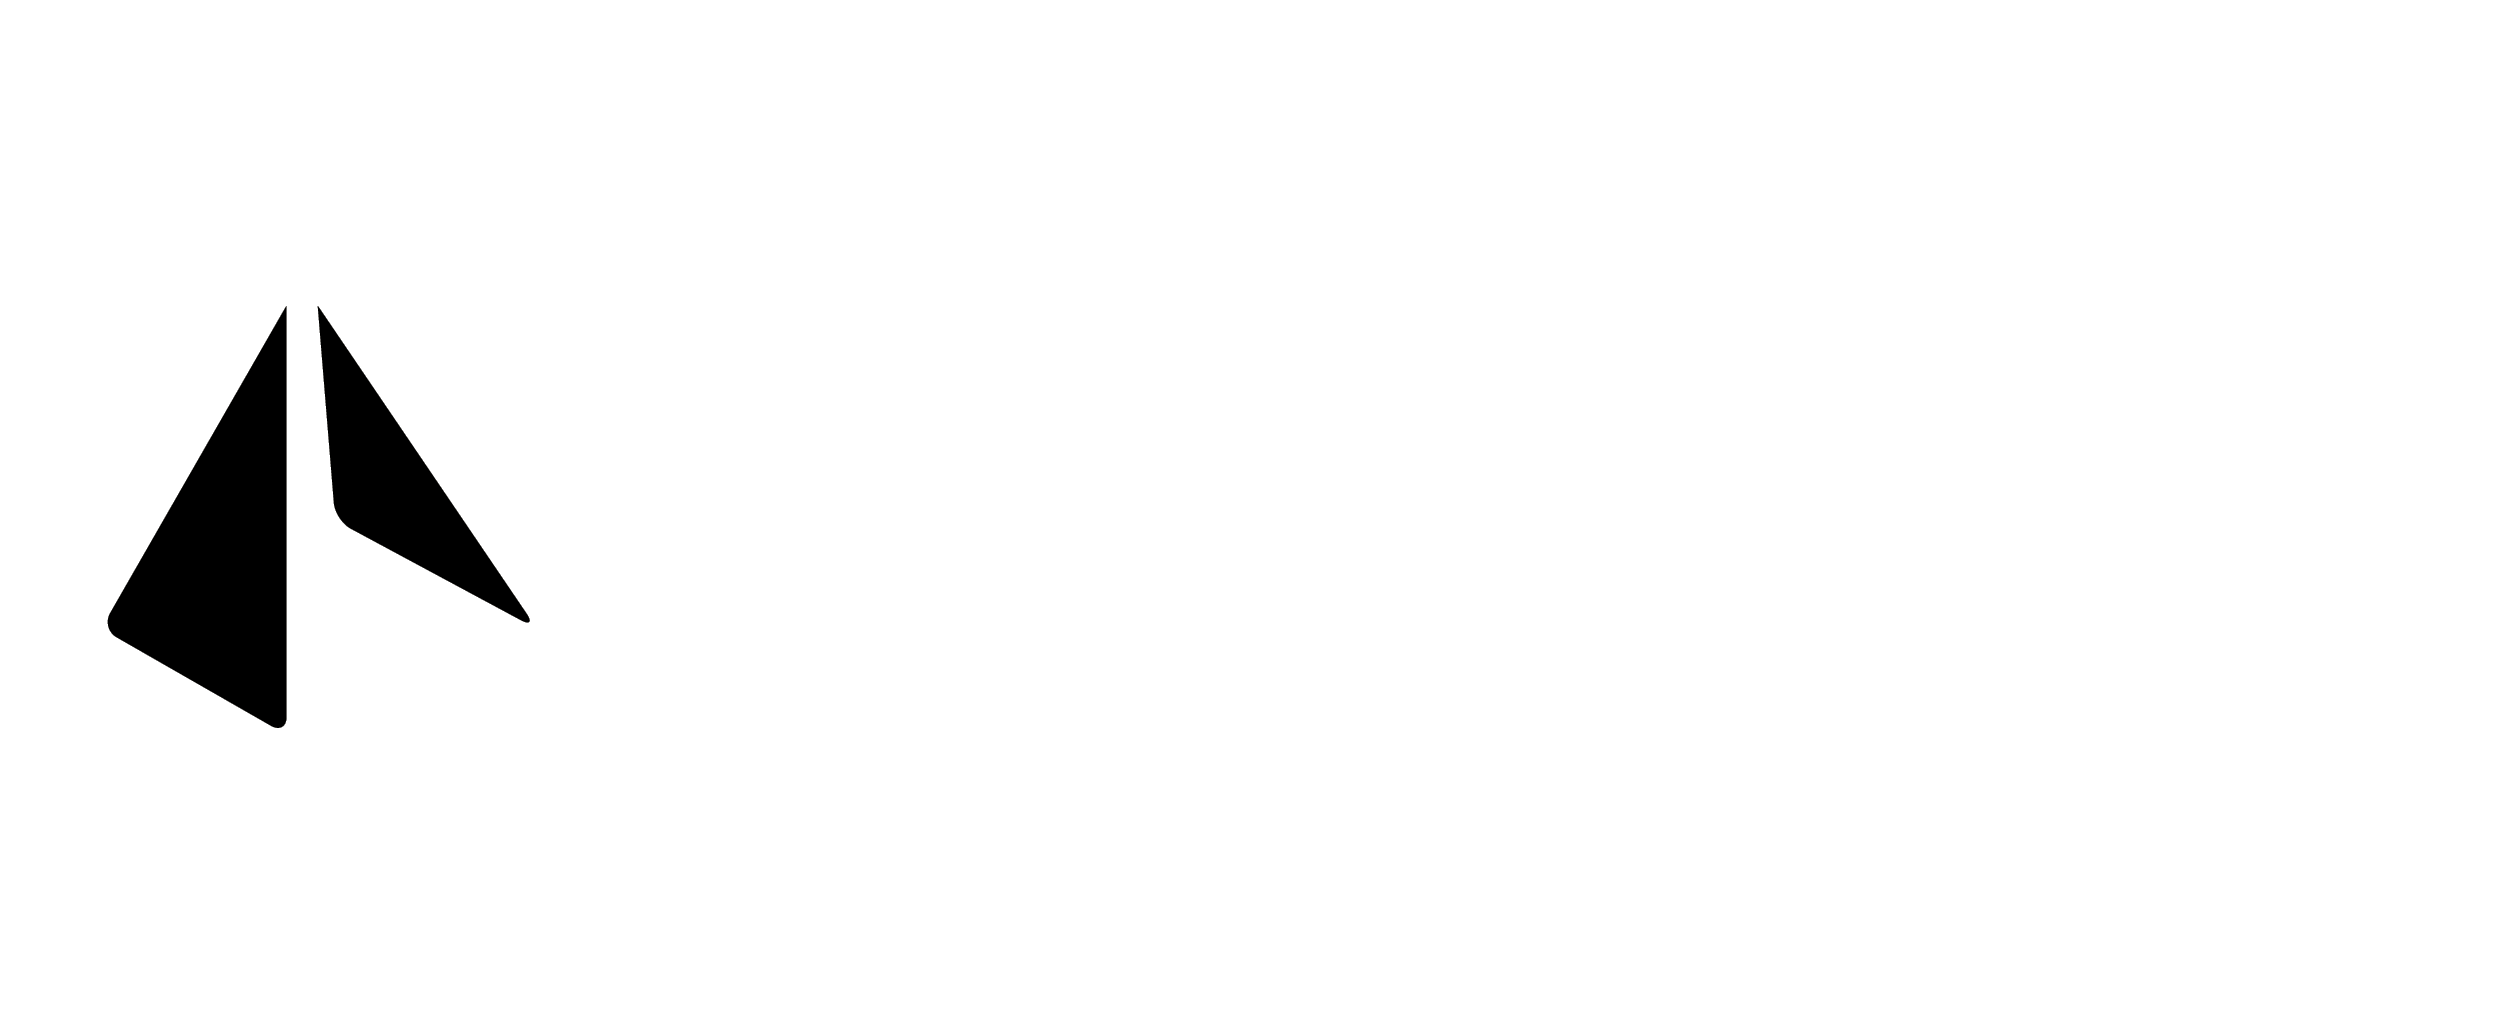 The logo for Aliya on a white background.